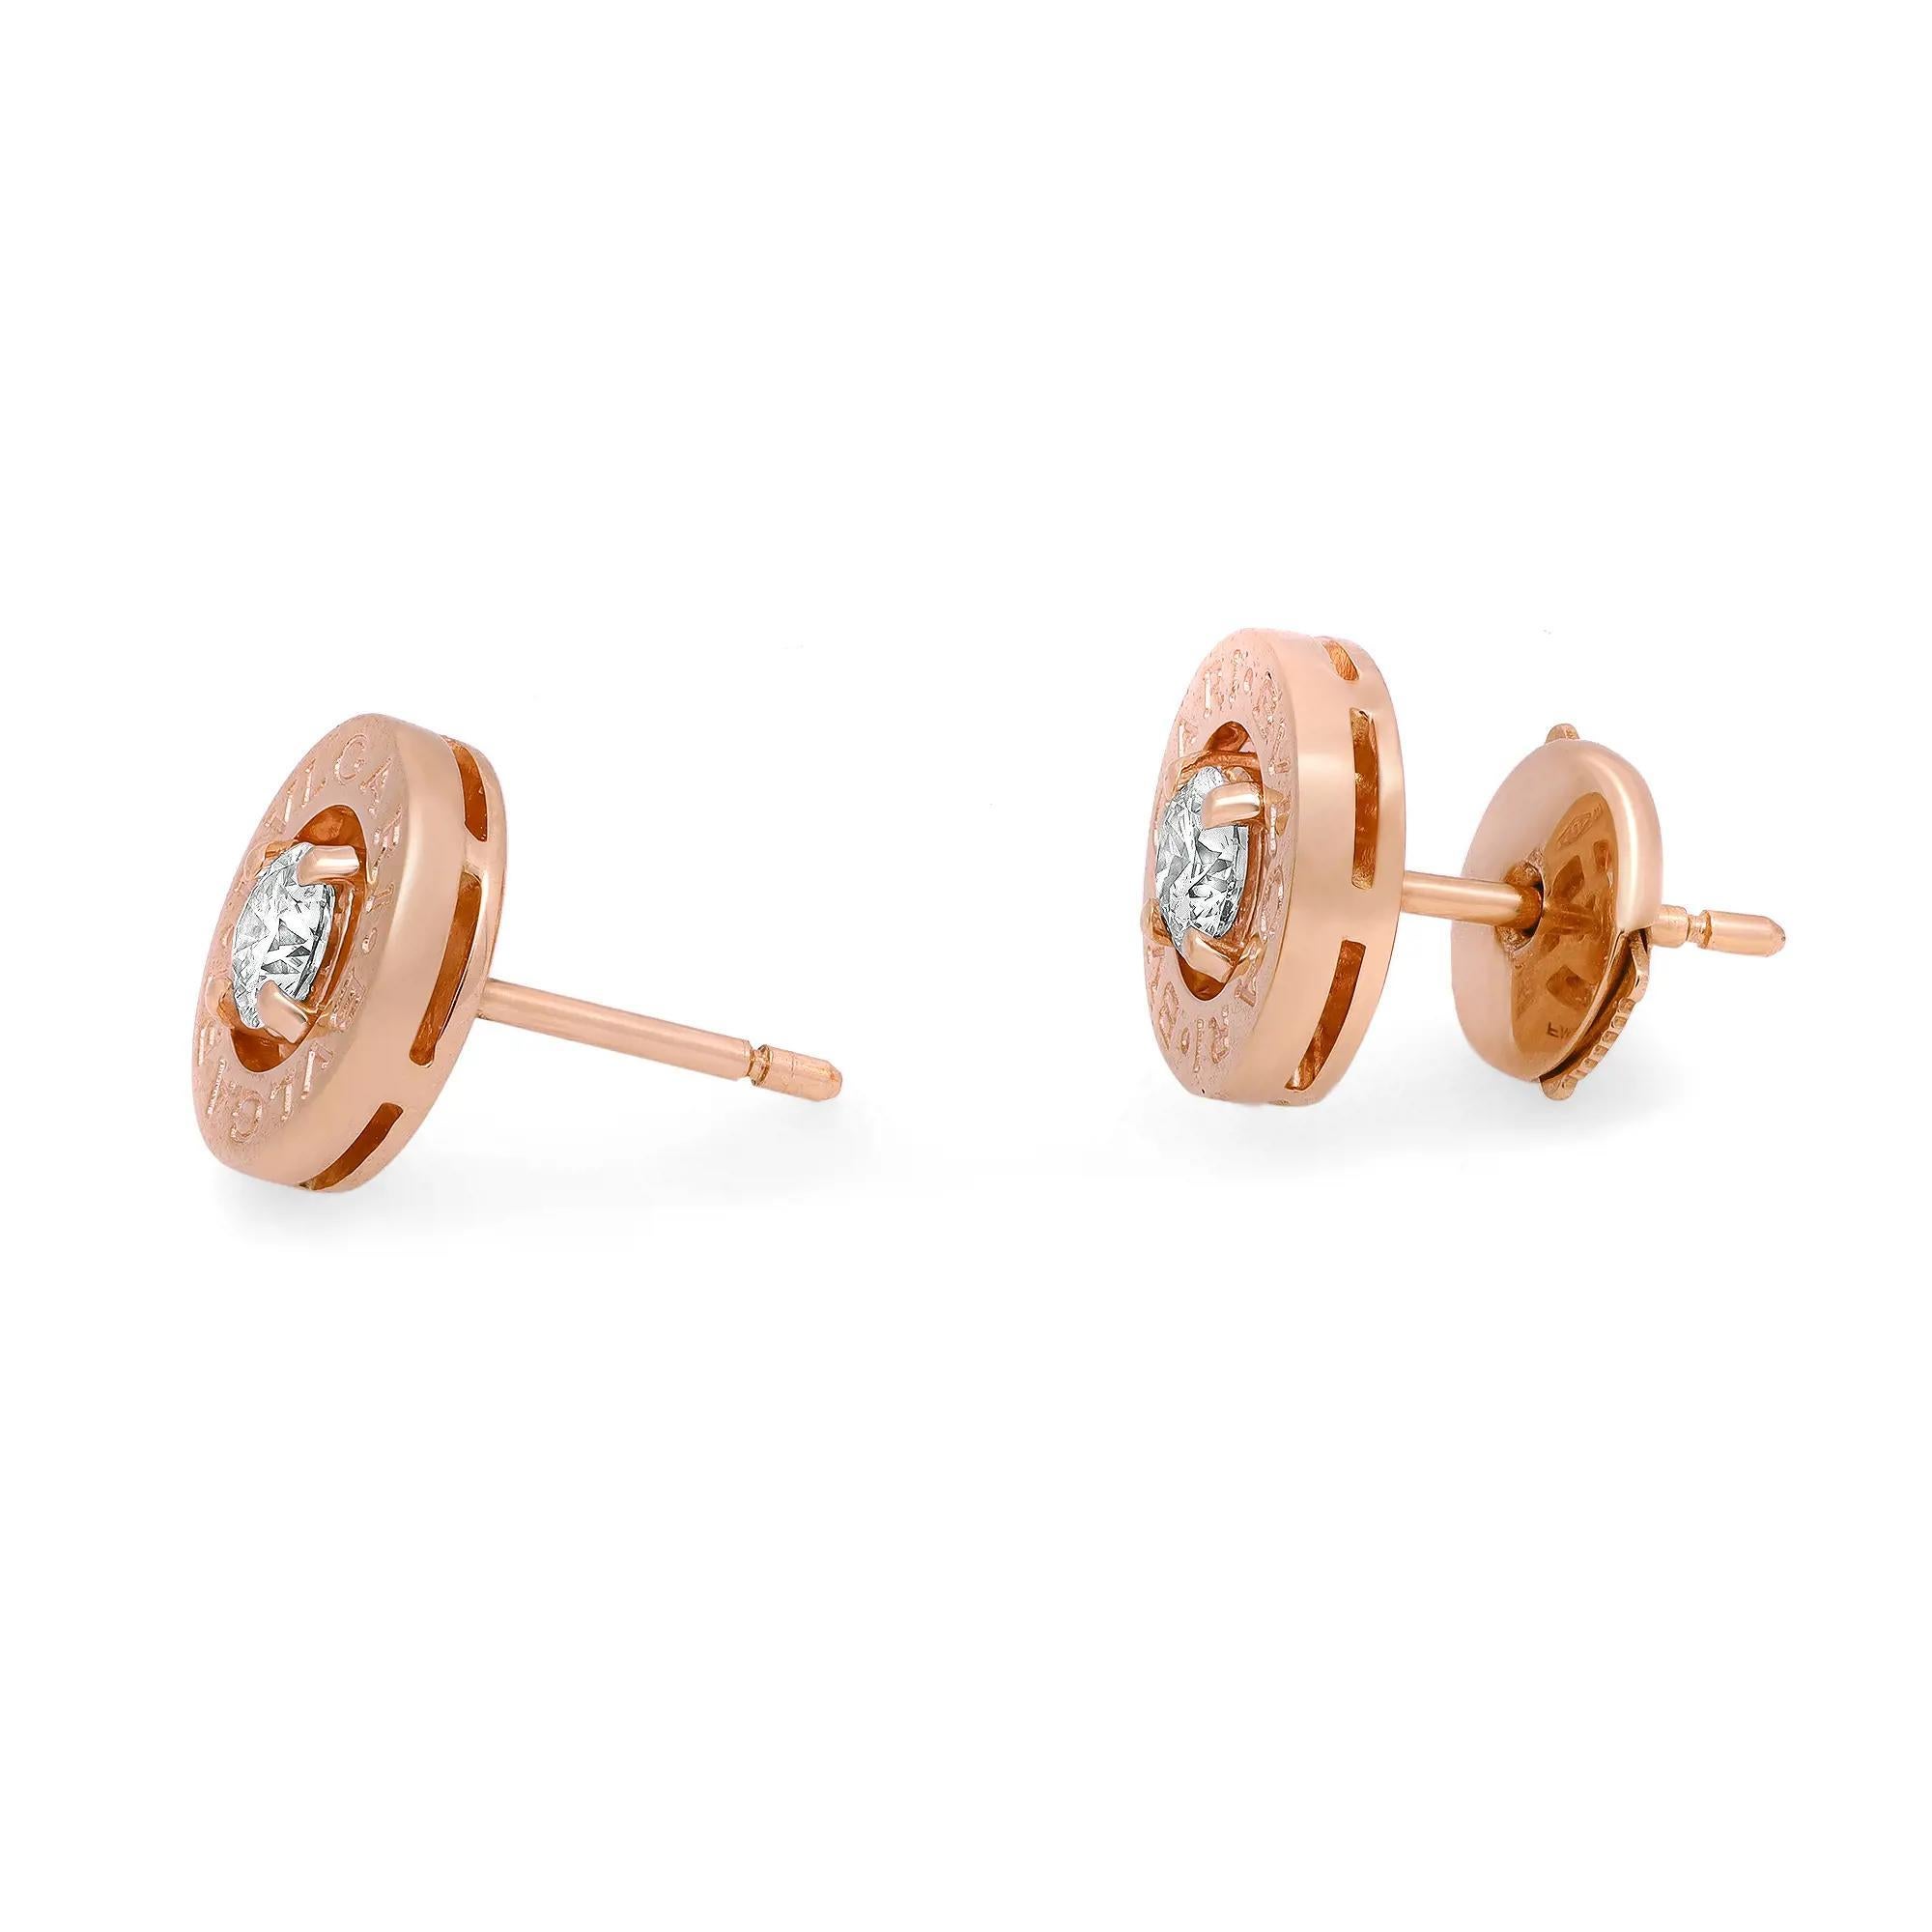 These dazzling diamond earrings from the house of Bvlgari are a perfect addition to your jewelry collection. Crafted in fine 18K rose gold, it features a center prong set round brilliant cut diamond with engraved Bvlgari logo on the outer rim. Total